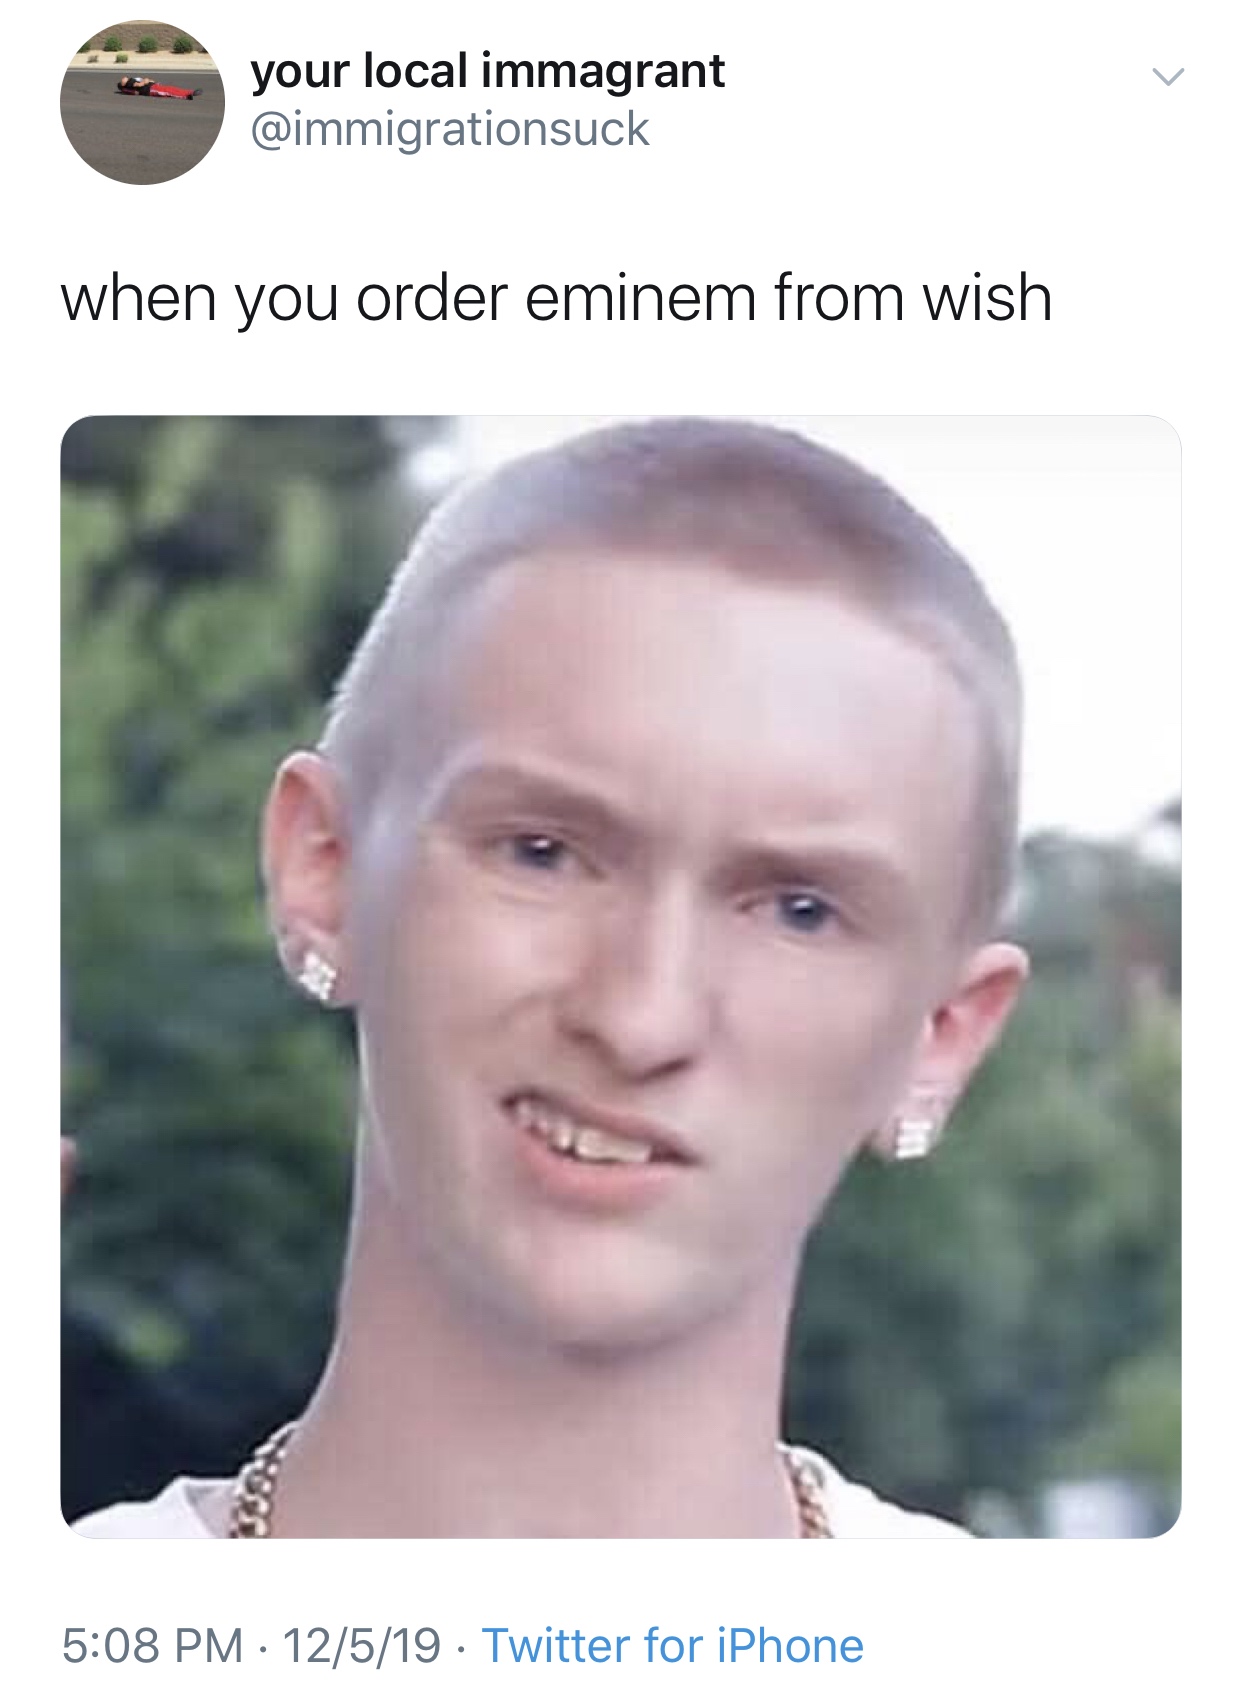 slim jesus face - your local immagrant when you order eminem from wish 12519 Twitter for iPhone